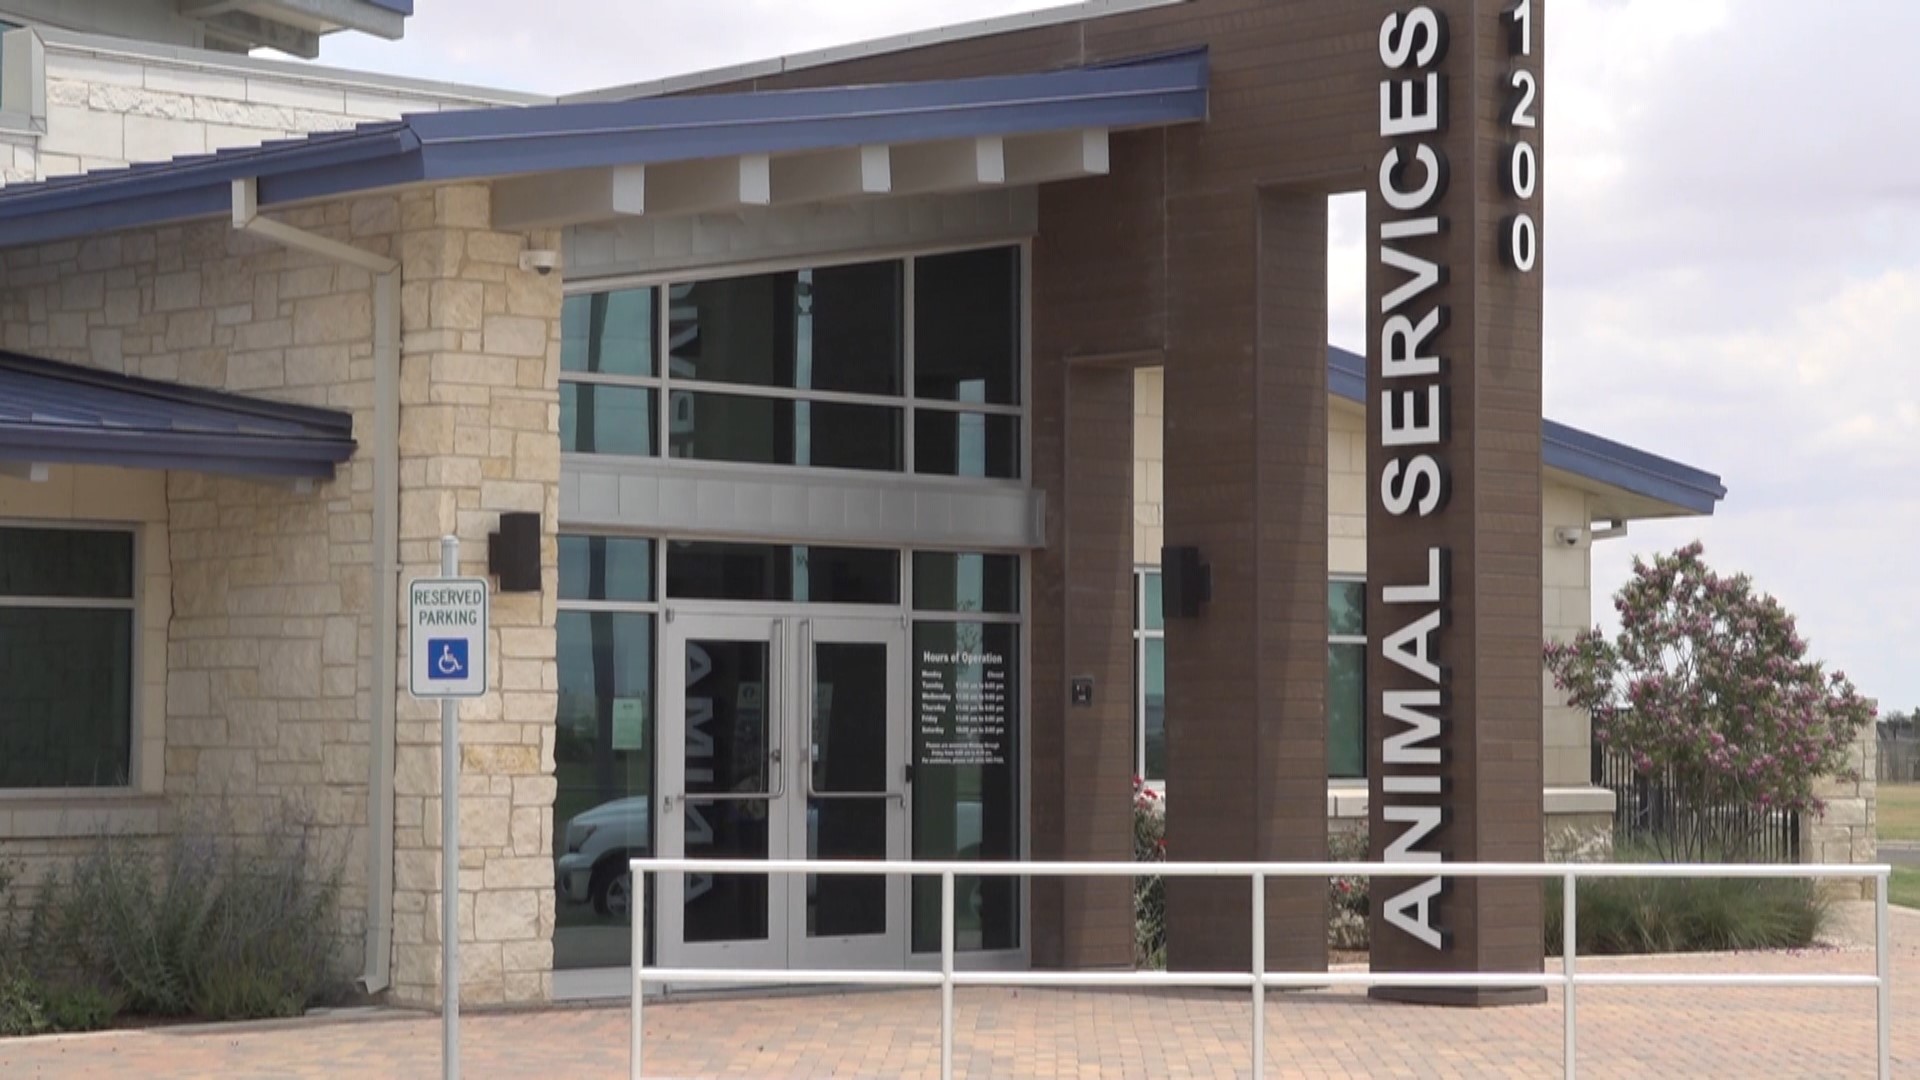 The city is attempting to fill veterinarian, manager, care specialist, volunteer and rescue coordinator positions at Midland Animal Services.